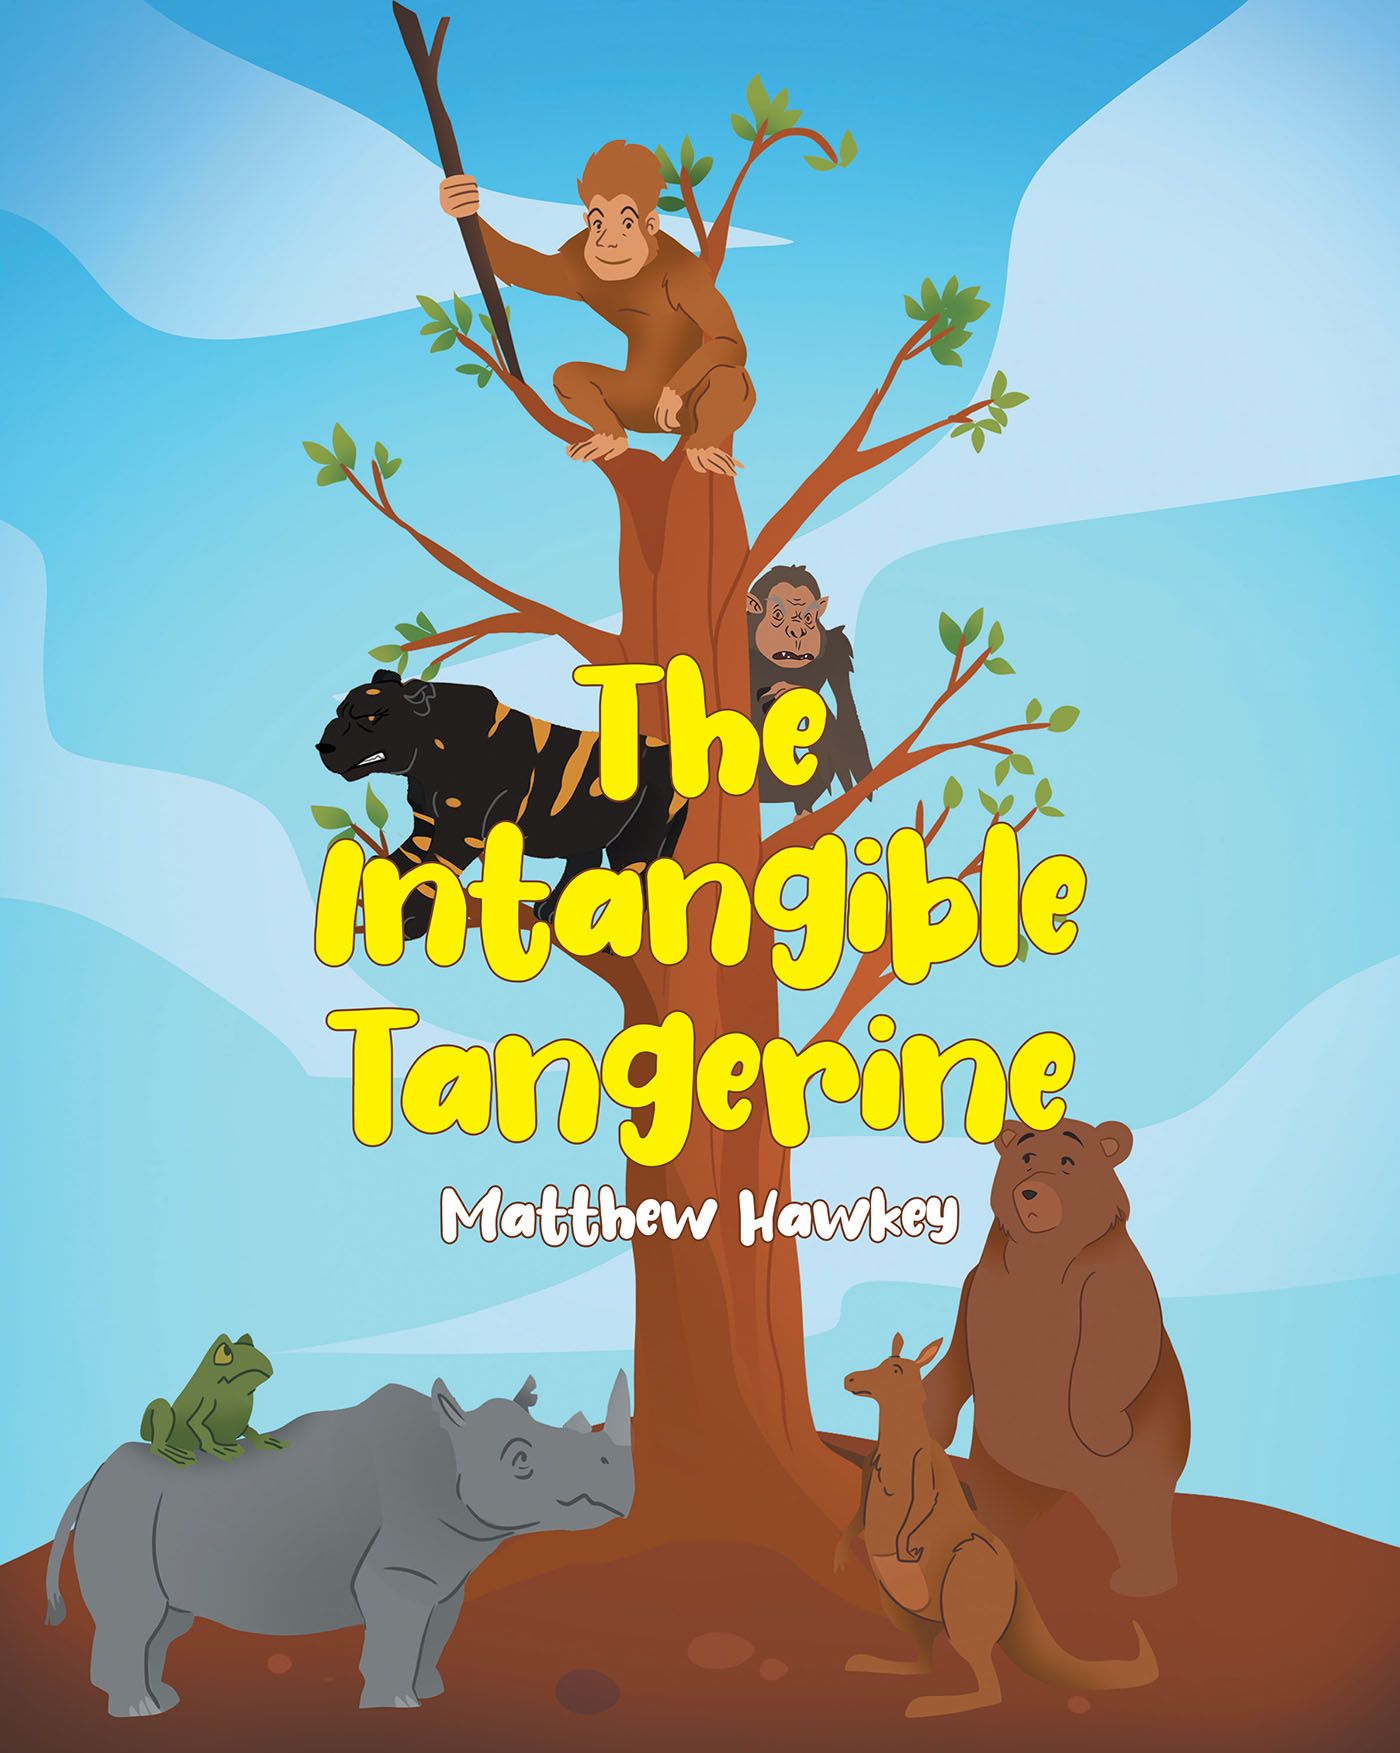 Matthew Hawkey’s New Book, "The Intangible Tangerine," is About a Bear Who Wakes Up from Hibernation and Can't Find Any Food in the Forest, But He Does Find New Friends